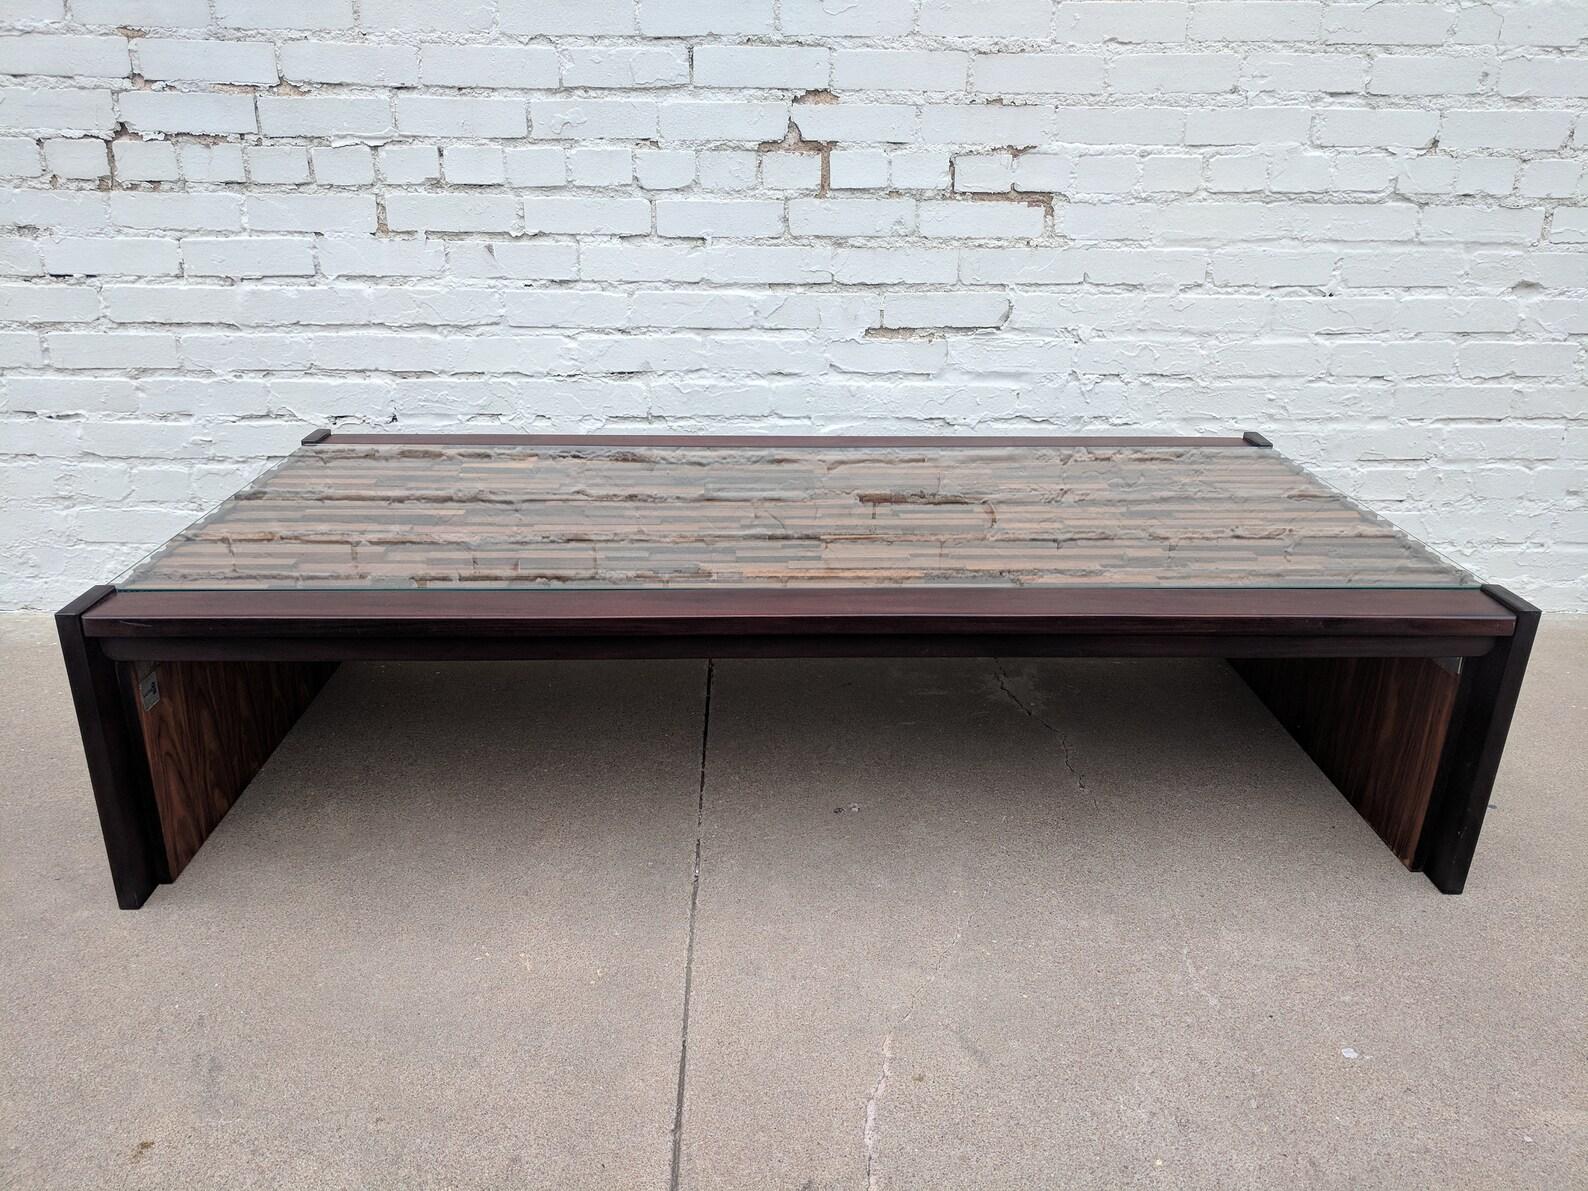 Mid Century Modern Percival Lafer Brutalist Rosewood Coffee Table

Above average condition and structurally sound. Wood is in very good condition. Some small areas with slight fading the wood.

Additional information:
Materials: